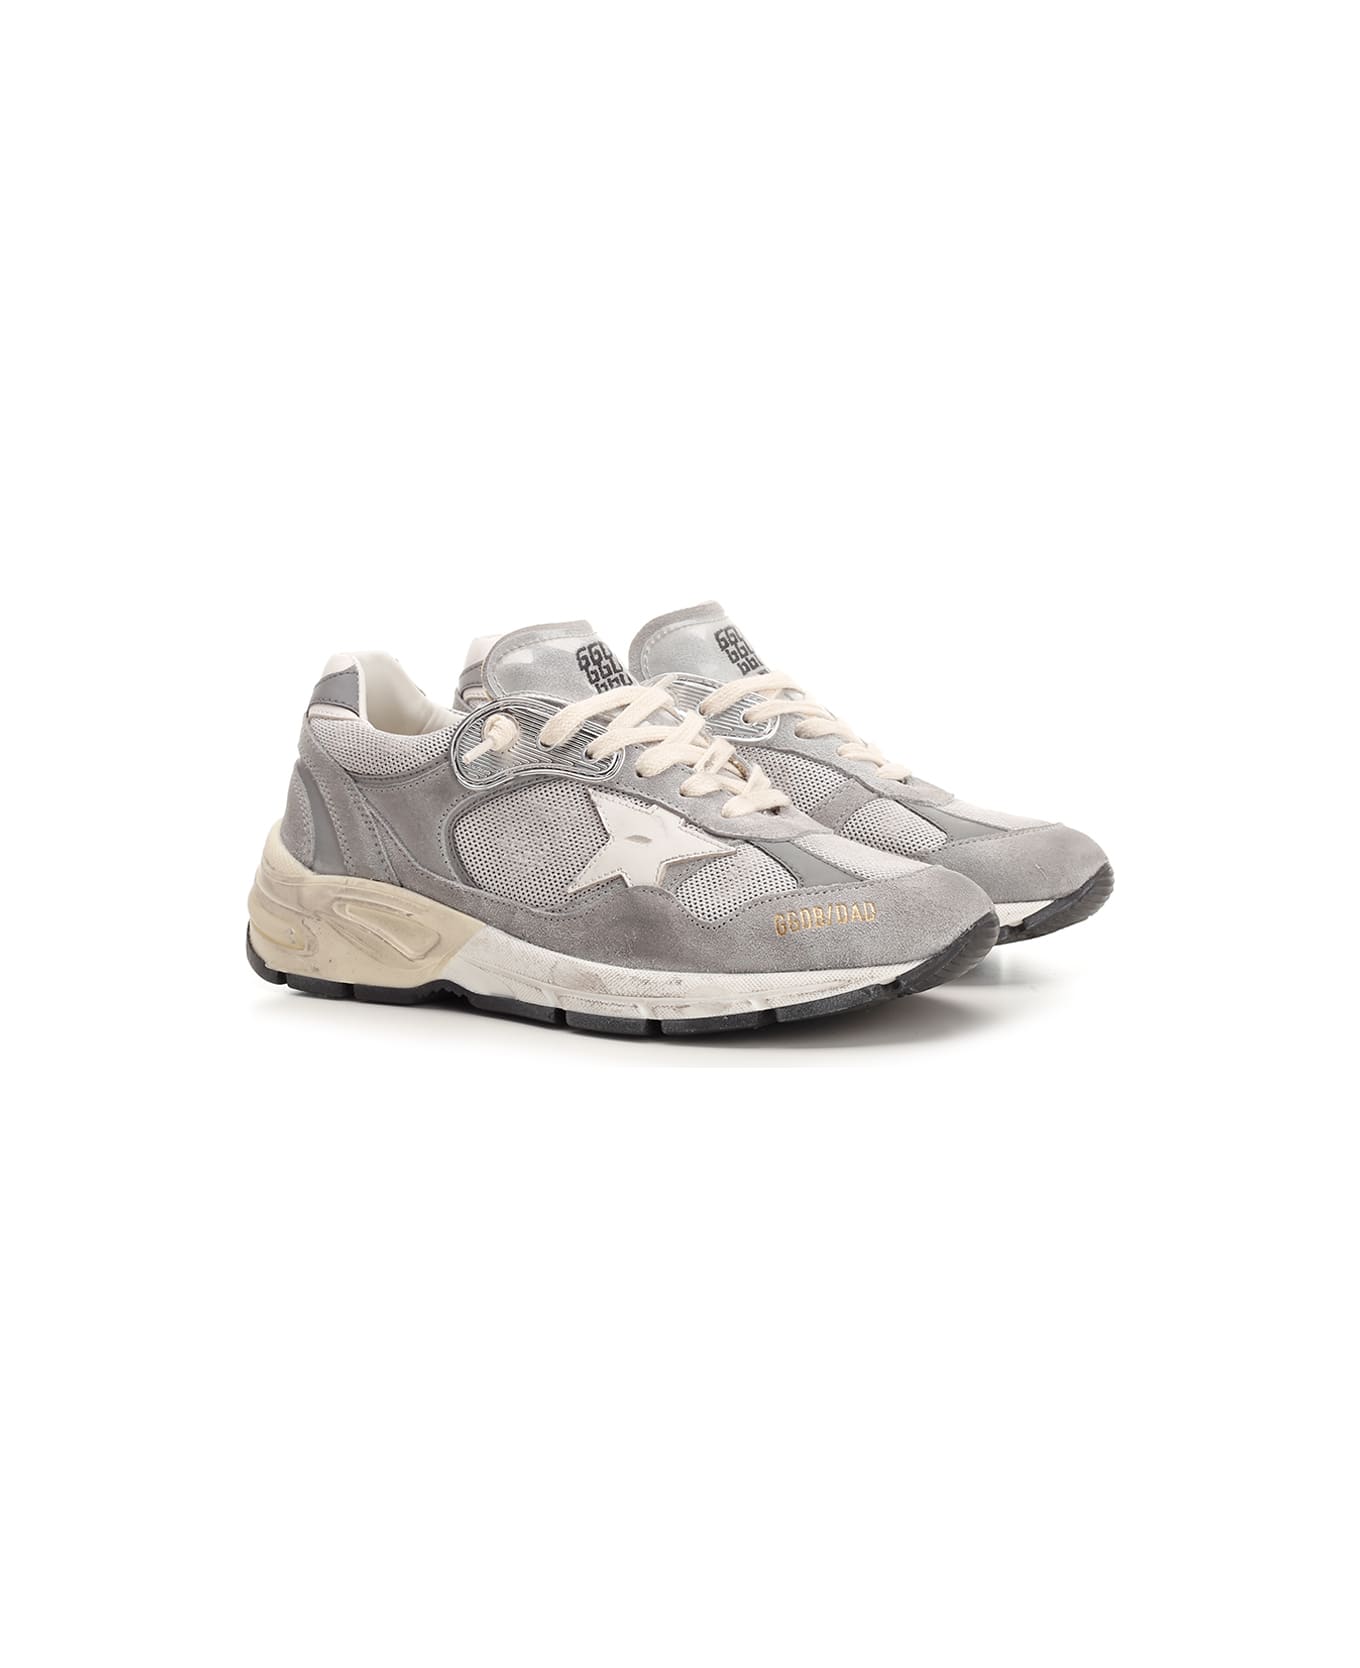 Golden Goose 'running Dad' Sneakers - grey/SILVER/WHITE